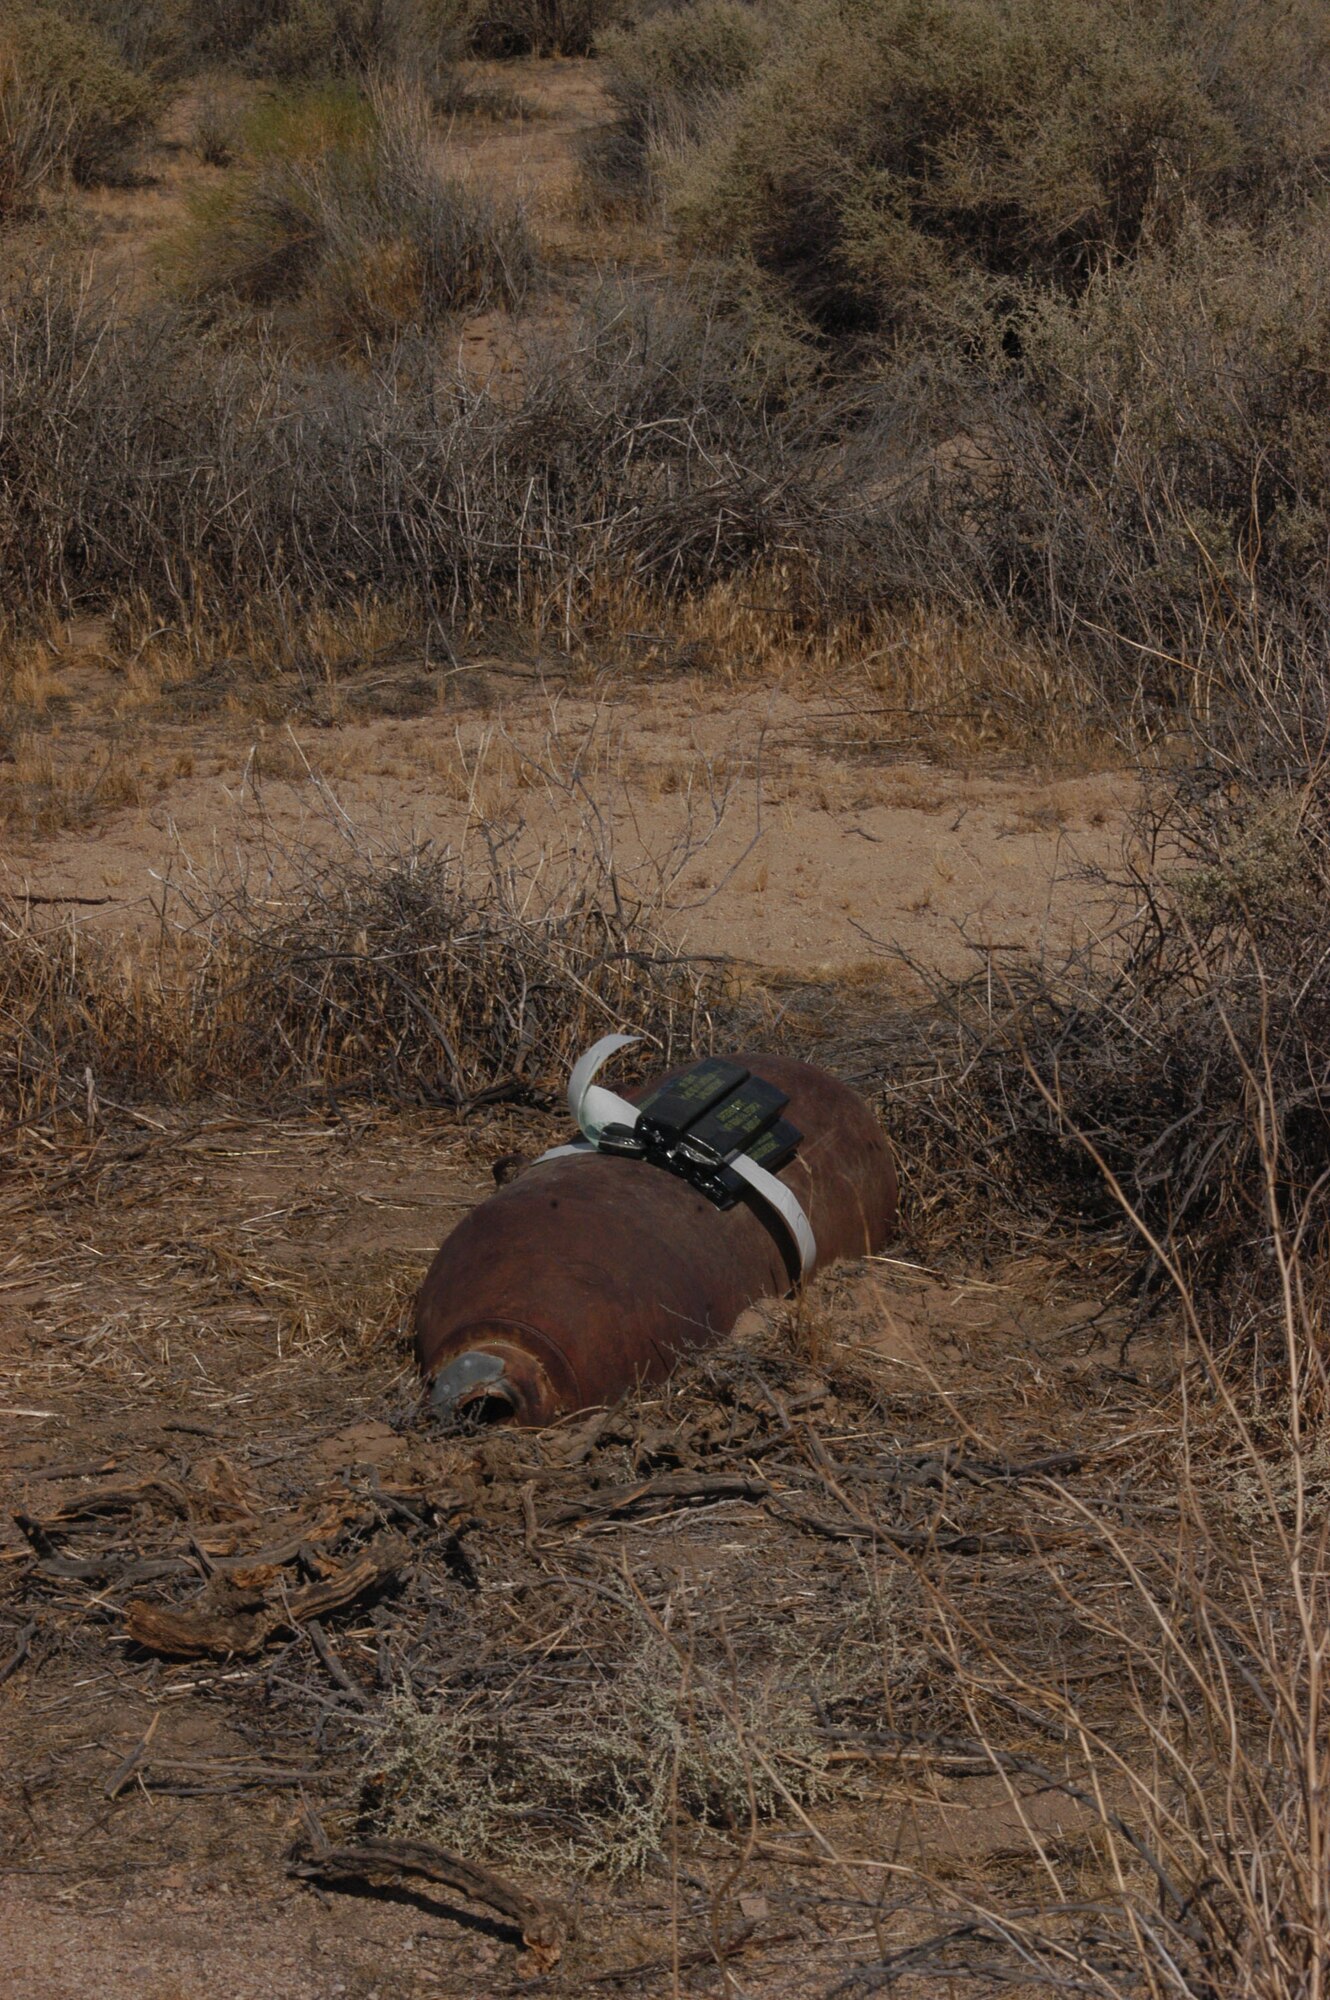 Edwards' Explosive Ordnance Disposal unit strapped charges to the top of an unexploded device found in Lancaster, Calif.   (Photo by Capt. Vince King)